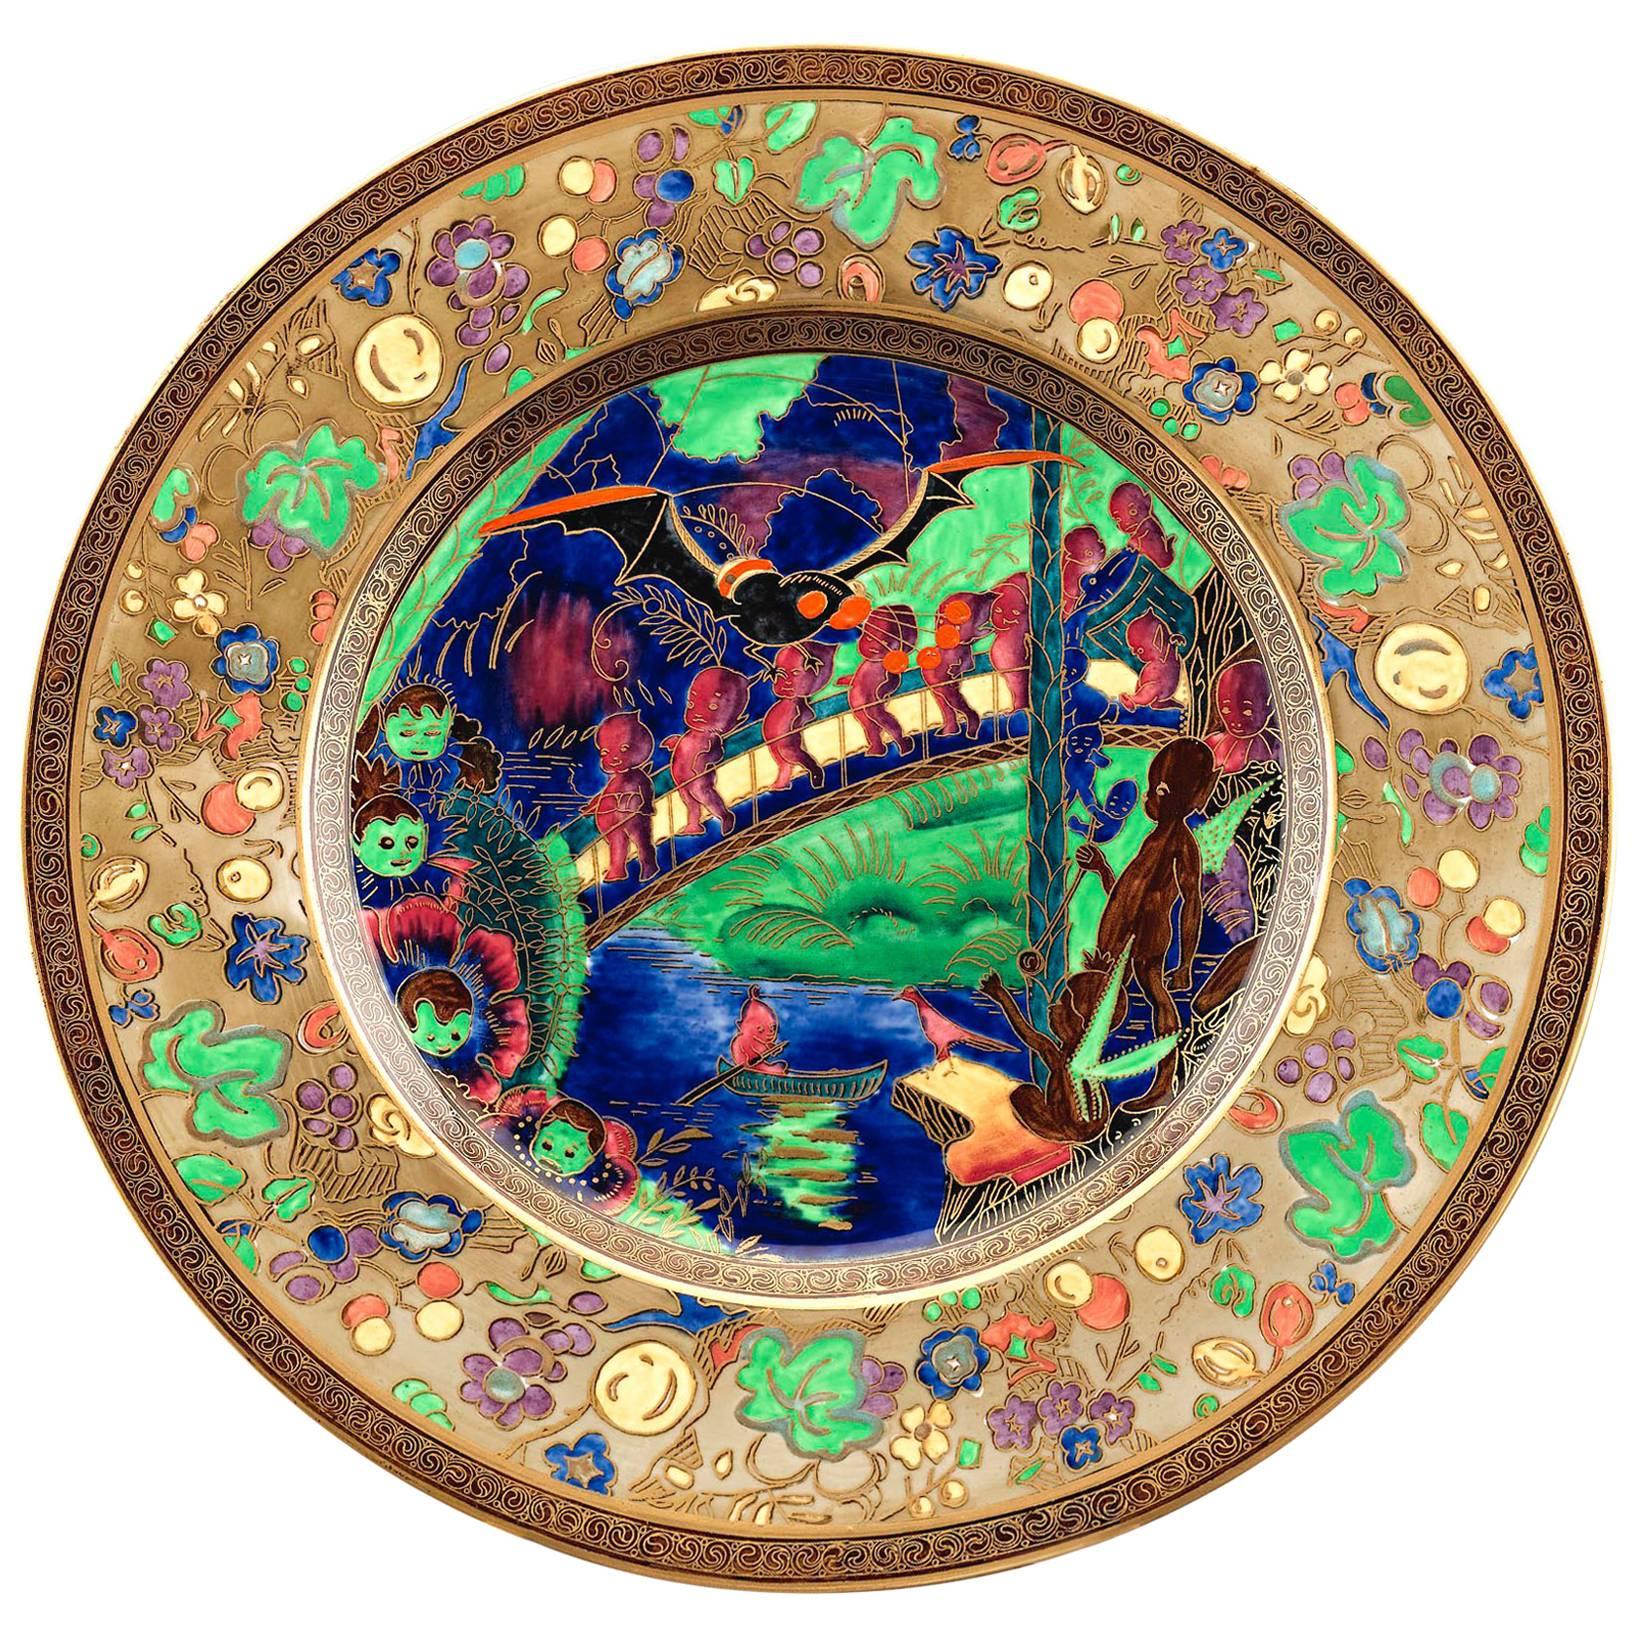 Fairyland Lustre Plate by Wedgwood